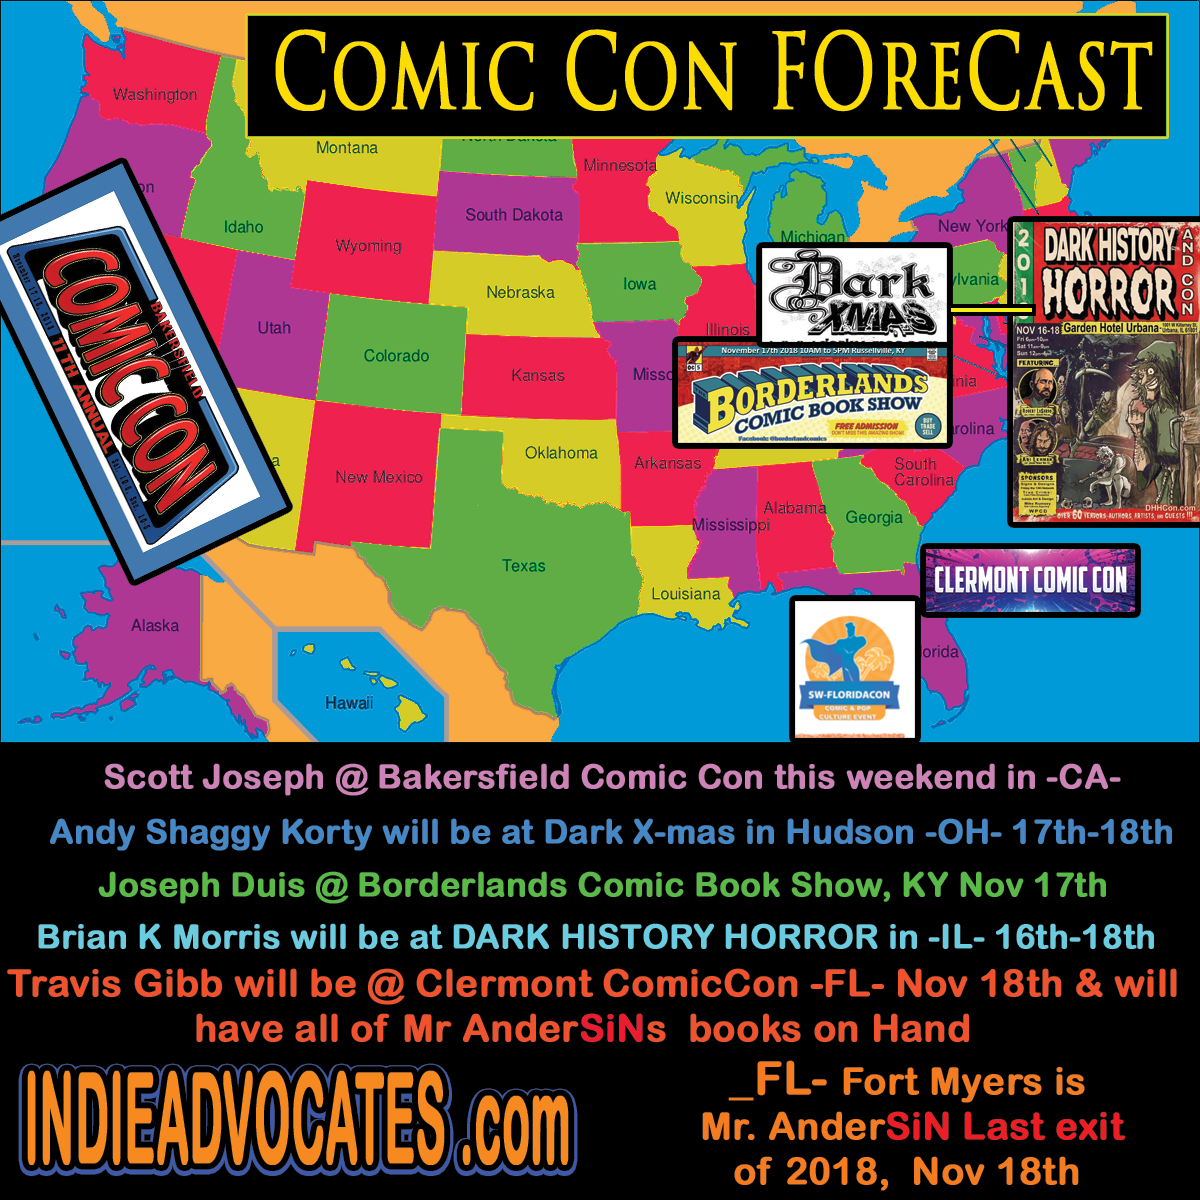 THE COMIC CON HIGHWAY WEEKEND FORECAST & Mr AnderSiNs Last Exit for 2018:: (Nov 16-18) -CA- Scott Joseph is at Bakersfield Comic Con:: -Fl- Clermont with Travis Gibb, Fort Myers with Mr AnderSiN:: -IL- Brian K Morris will be at DARK HISTORY HORROR:: -KT- Joseph Duis Borderlands Comic Book Show::  -OH- Andy Shaggy Korty will be at Dark X-mas